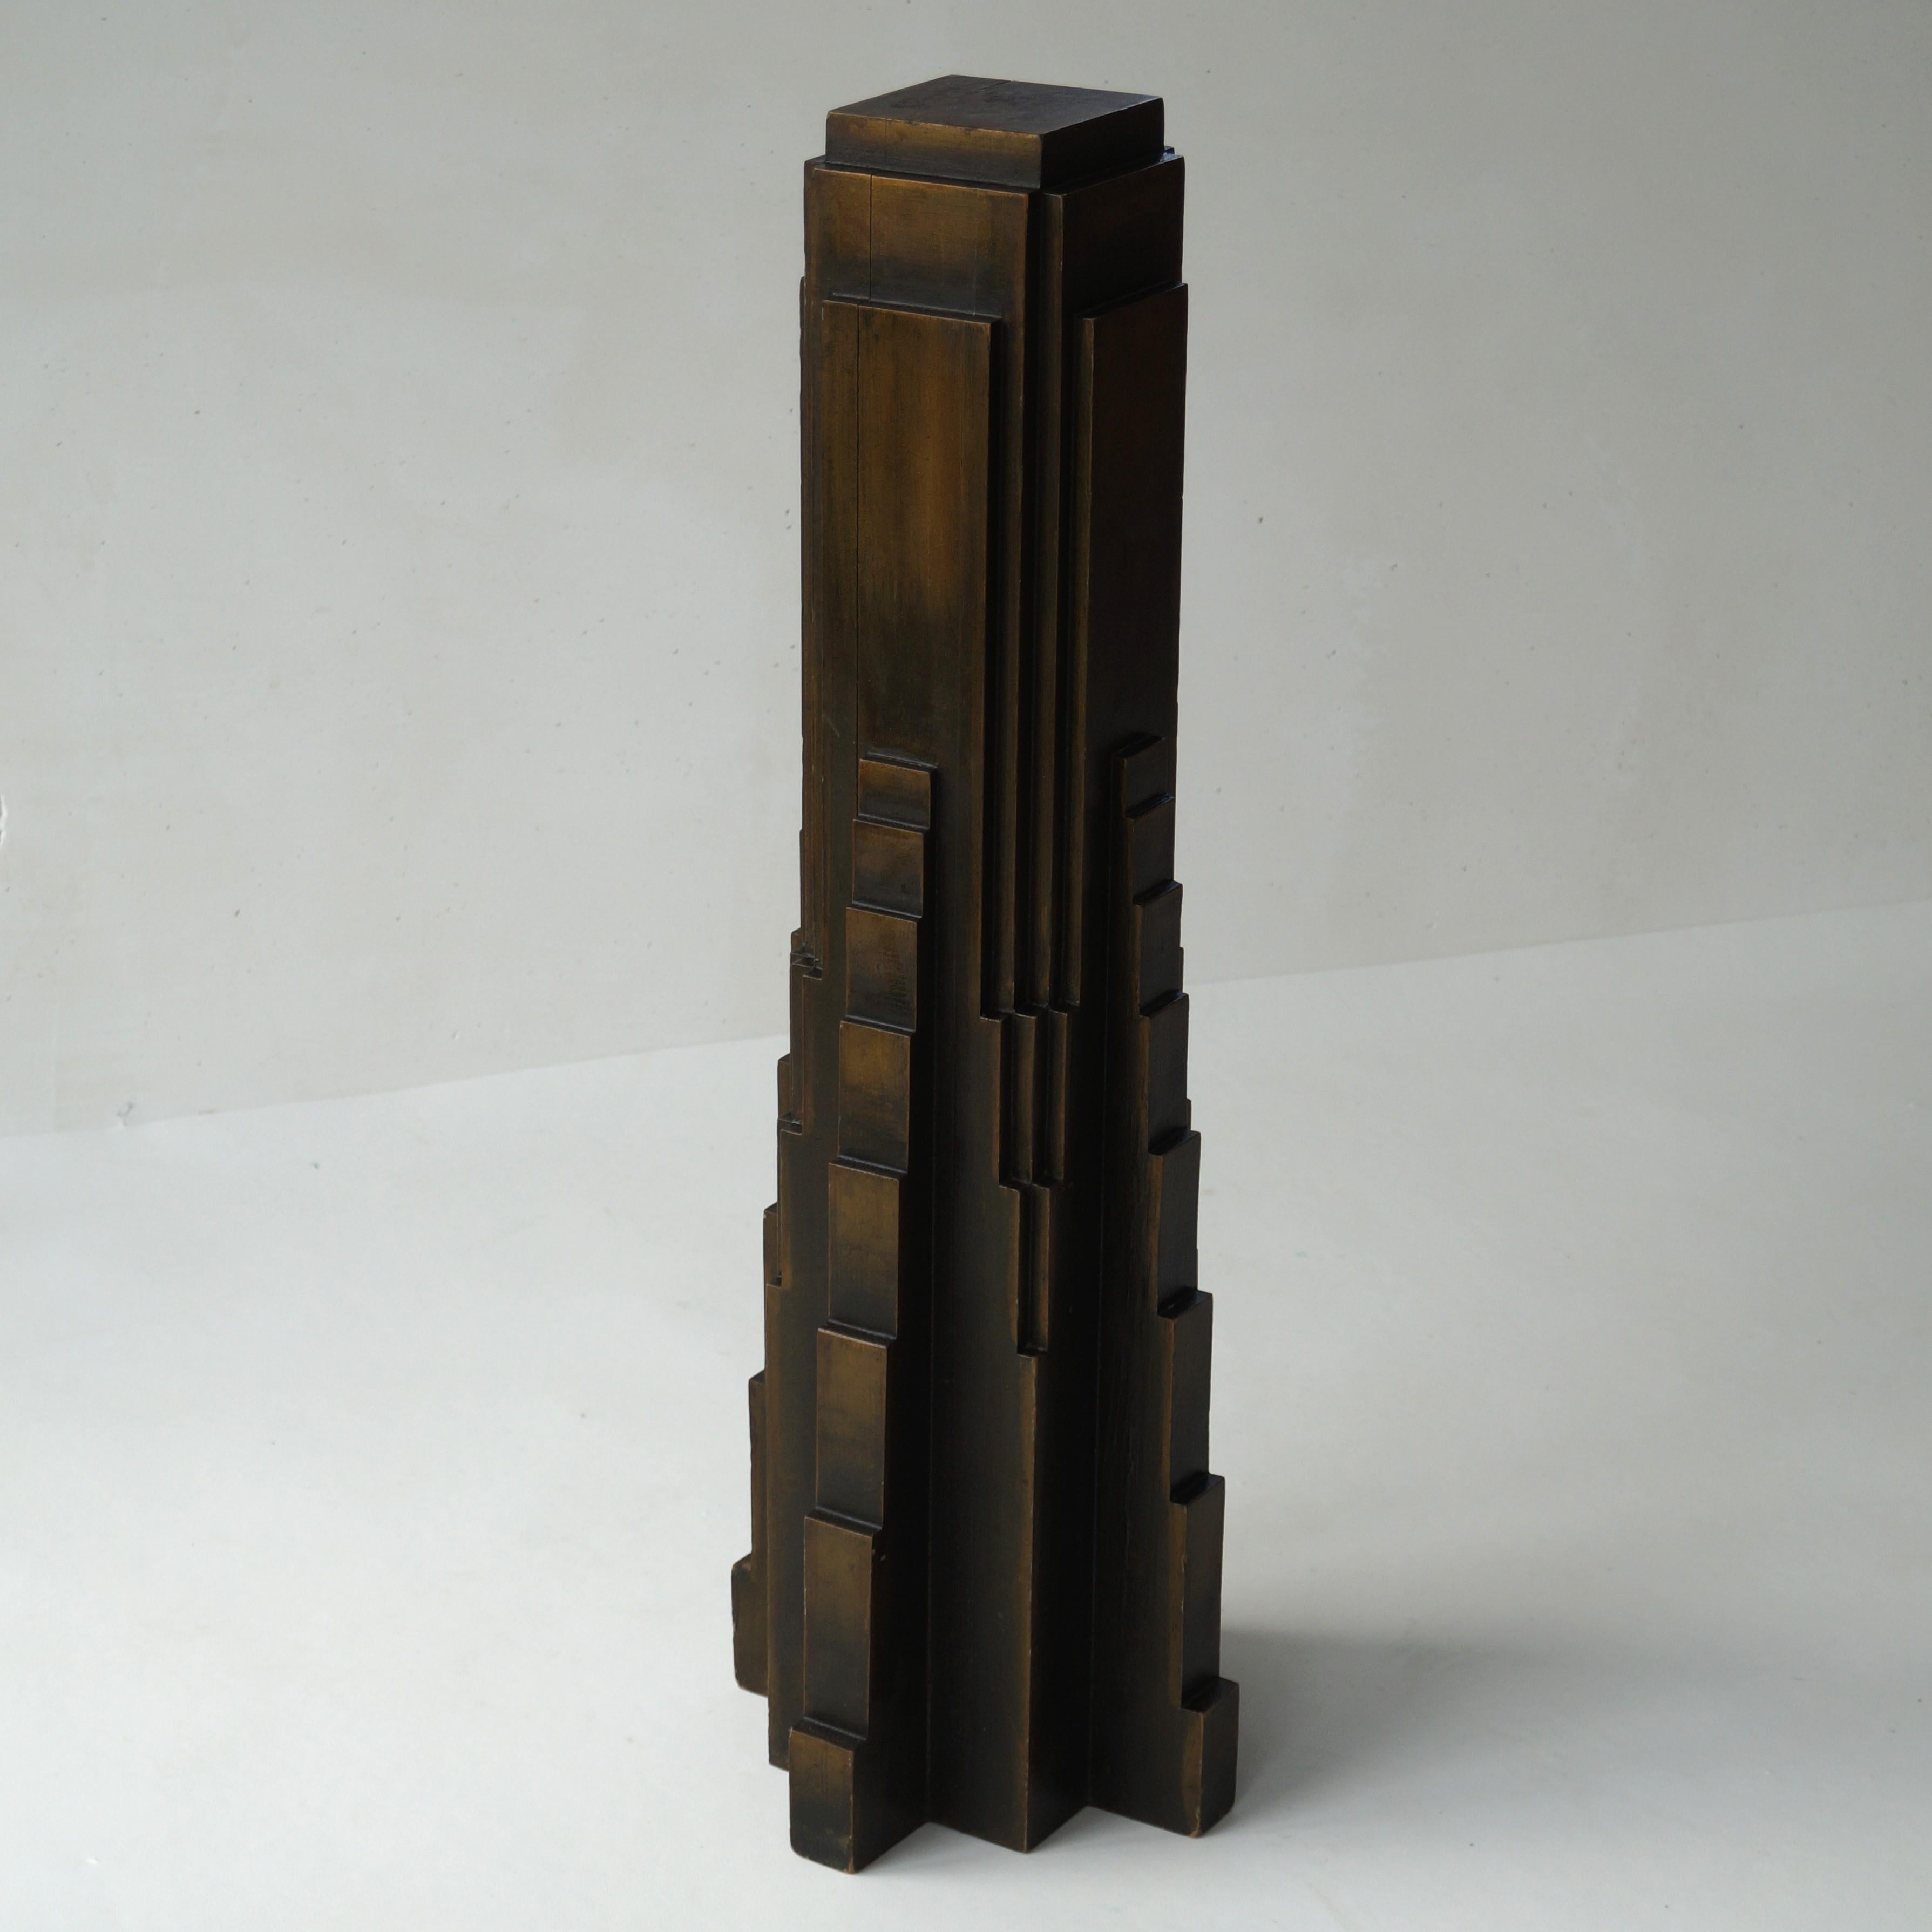 A tall and solid wooden antique art deco pedestal, column or plinth, dating from around 1930 and most probably made in Belgium.
The piece has an impressive sculptural design with modernist lines in the shape of a skyscraper, tapering towards the